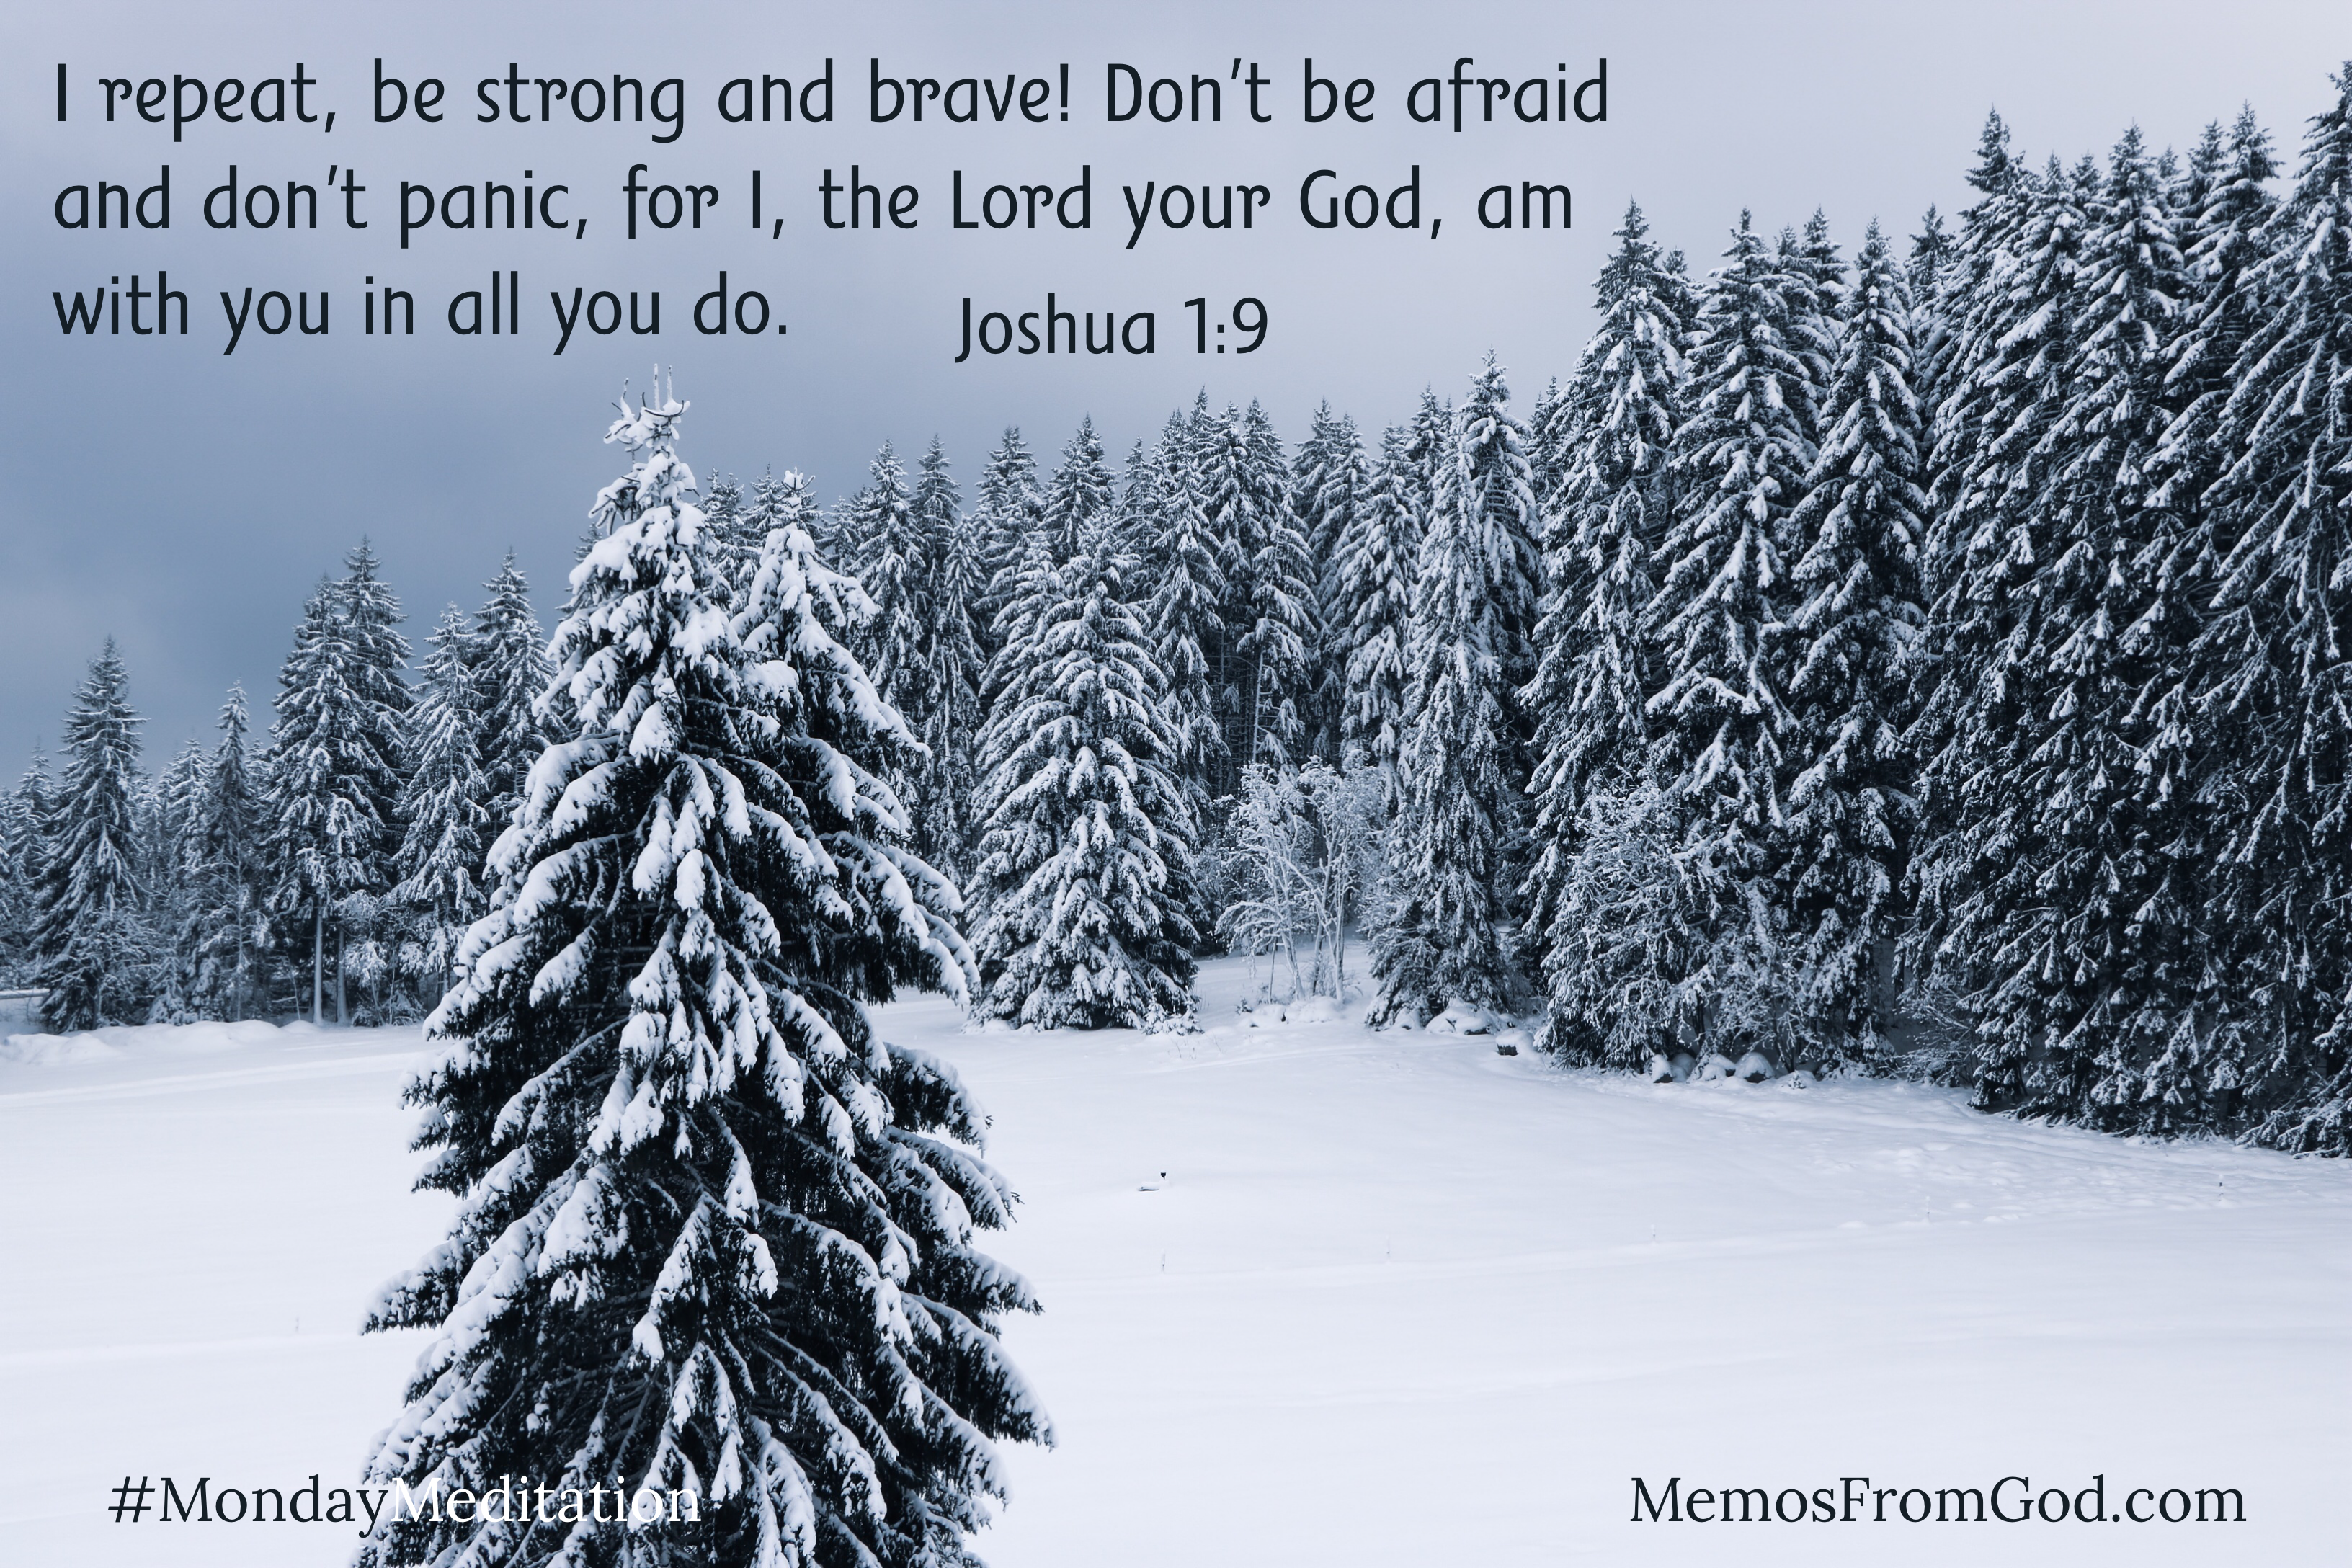 A single evergreen tree stands in the foreground with a forest of evergreens standing behind. There is snow on the ground and on all the boughs. Caption: I repeat, be strong and brave! Don't be afraid and don't panic, for I, the Lord your God, am with you in all you do. Joshua 1:9